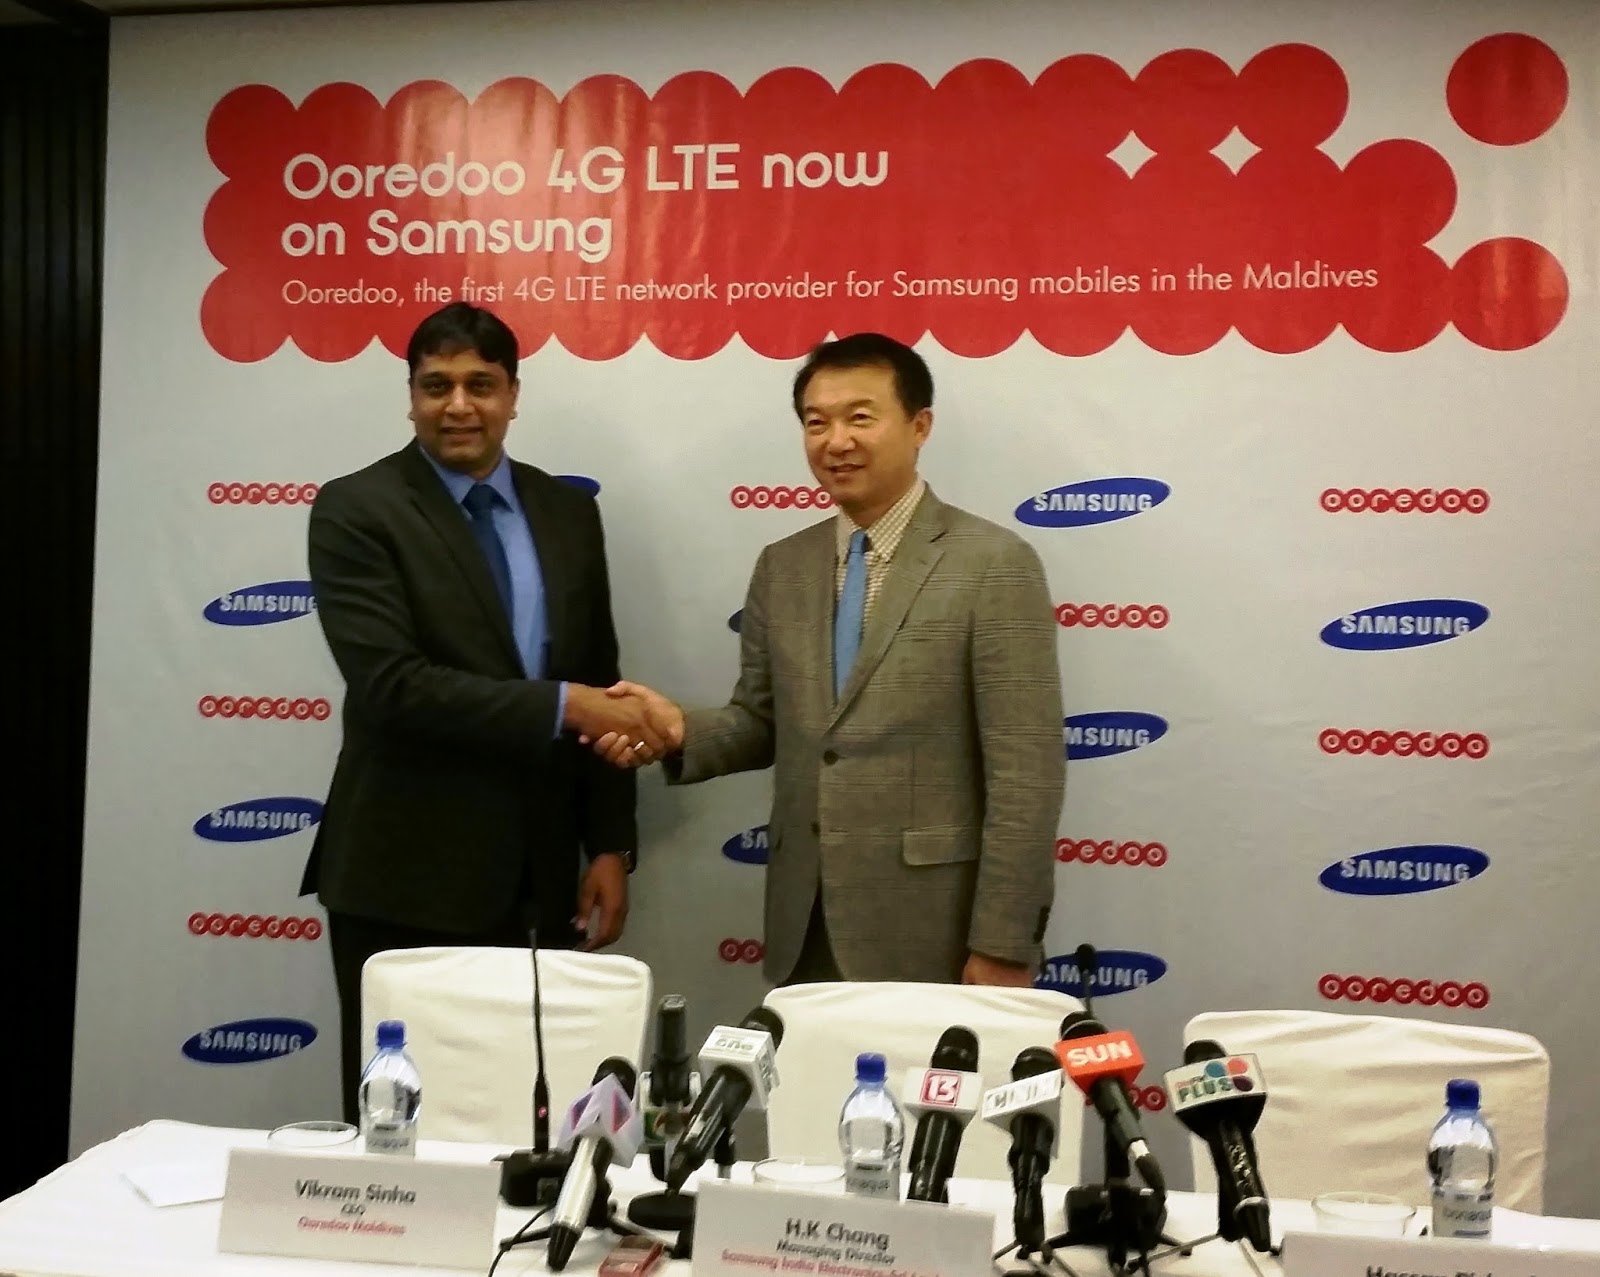 H.K. Chang, Managing Director, Samsung  India  Electronics- Sri Lanka Branch Office  and Vikram Sinha, CEO of Ooredoo officially announce their partnership in the Maldives.jpg